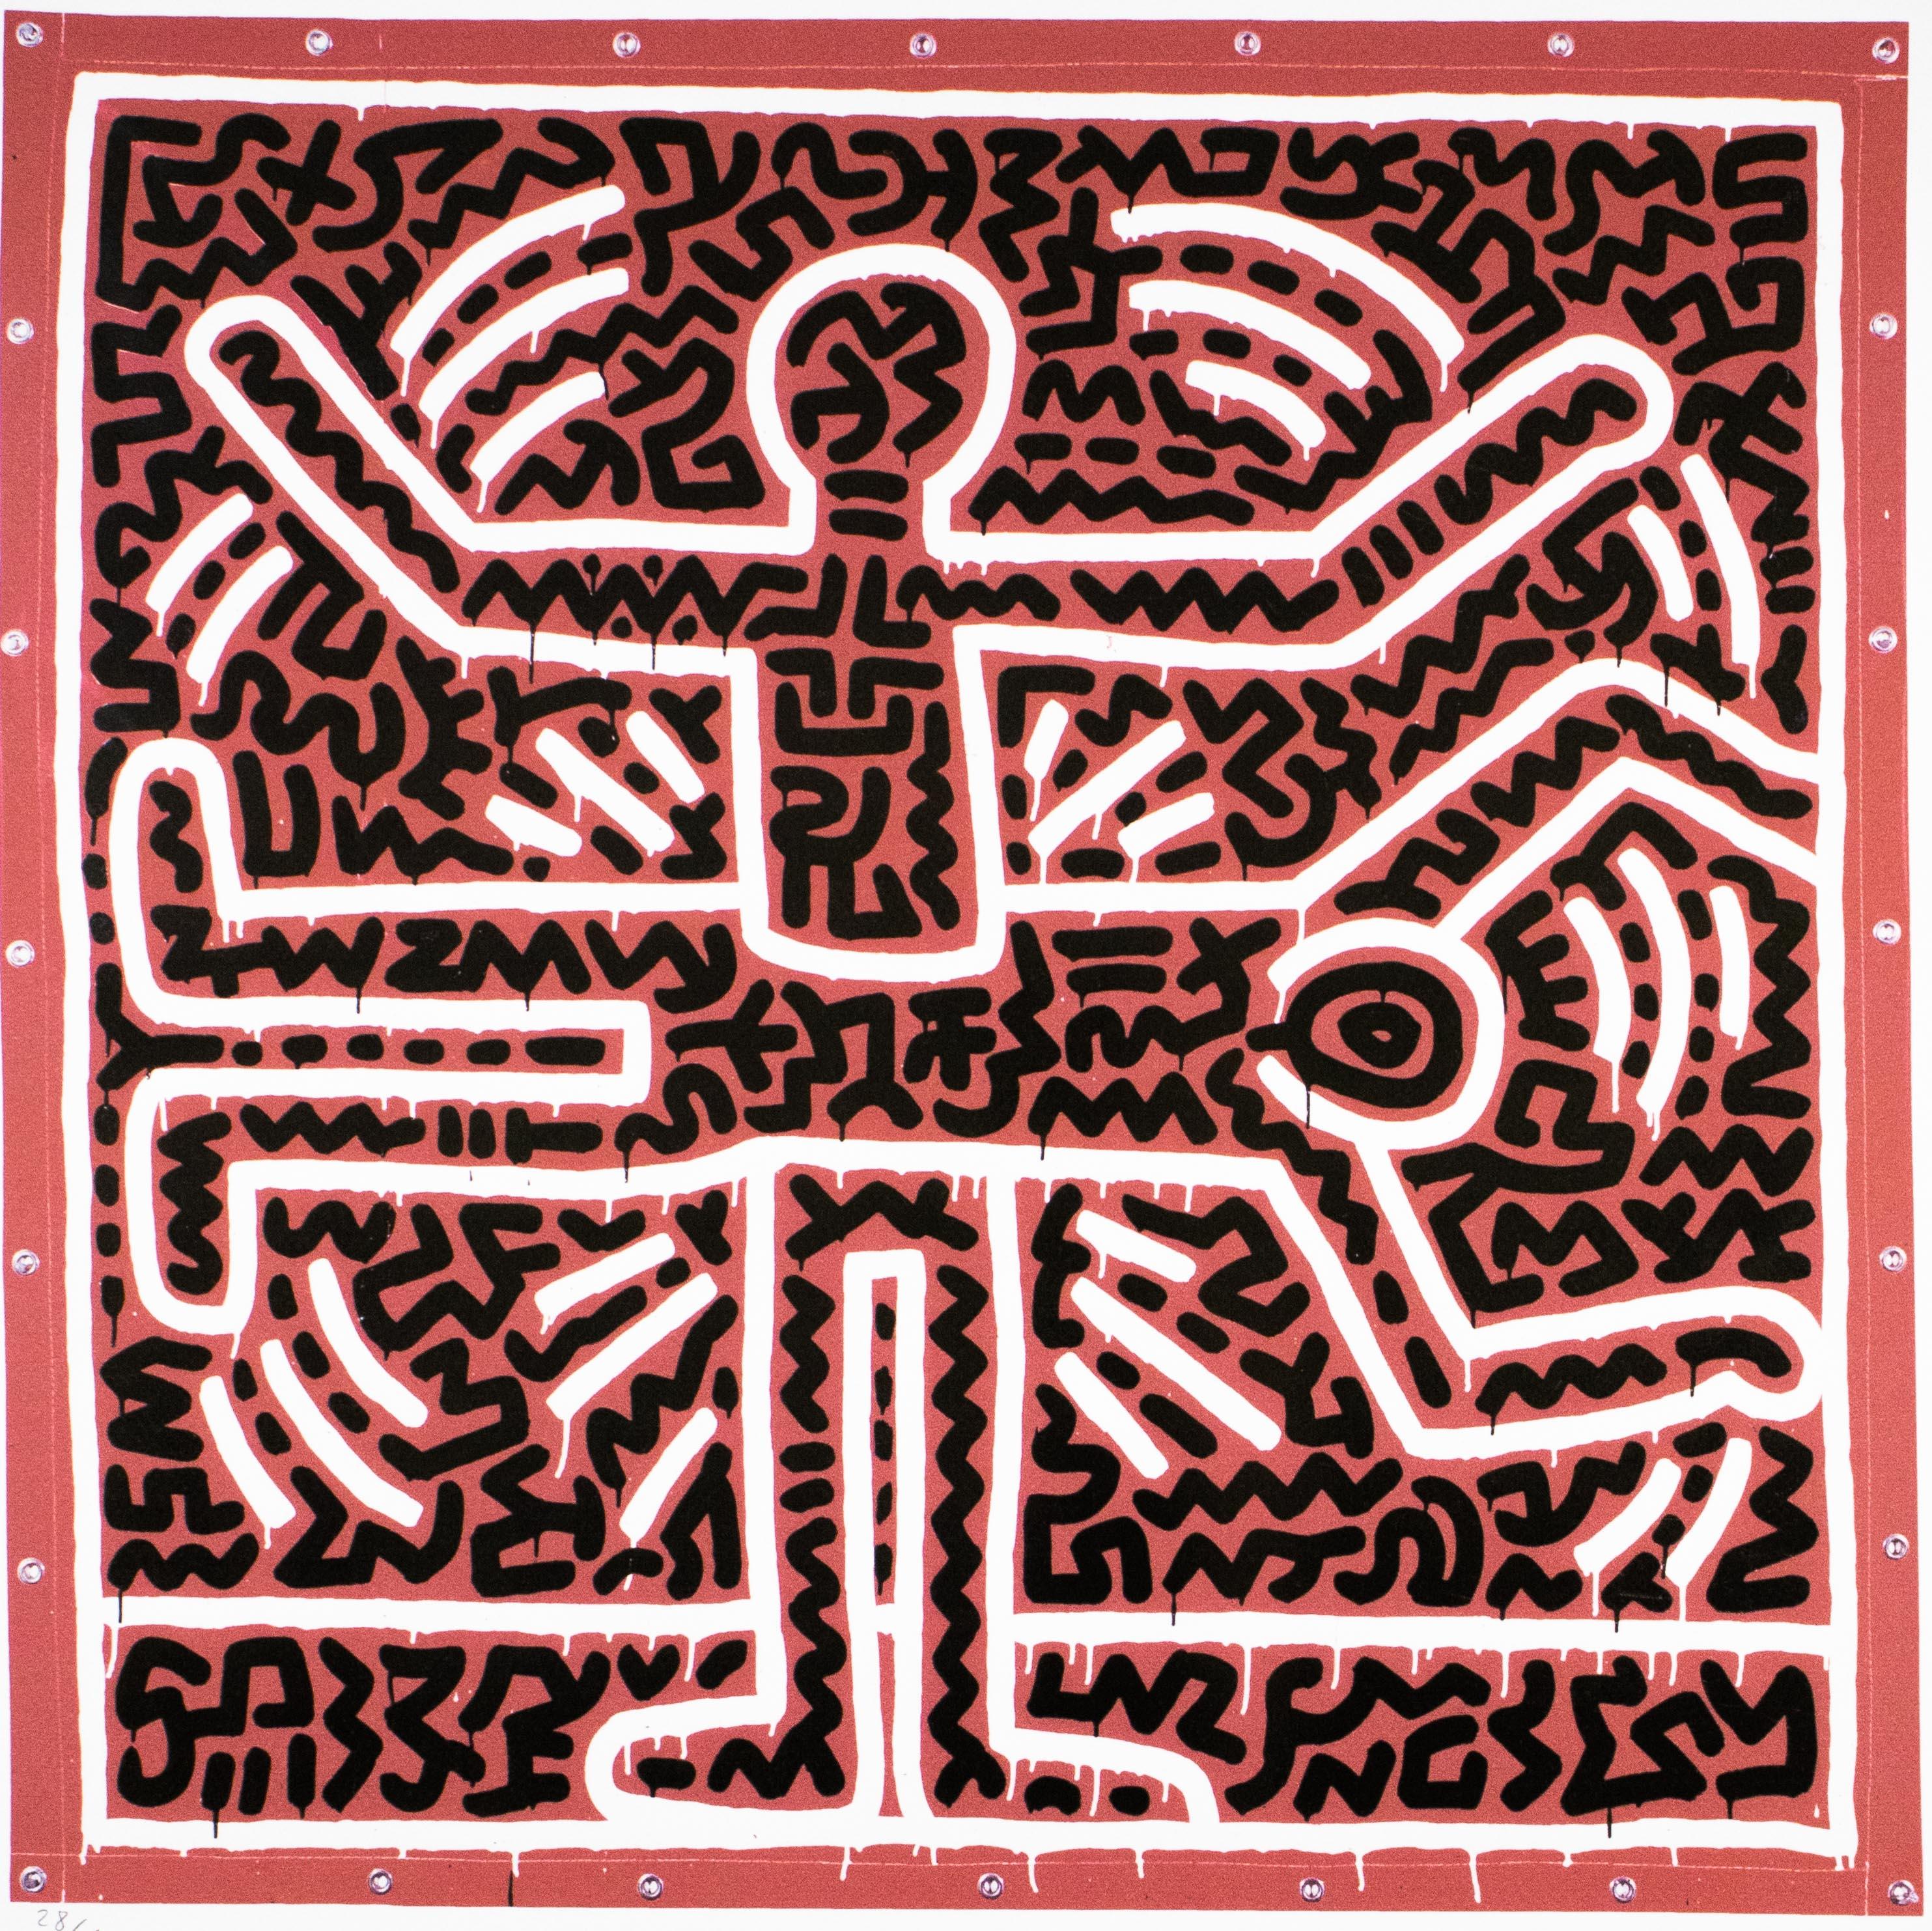 Lithographie – Limitierte Auflage 28/150 Exemplare – Keith Haring Foundation Inc.